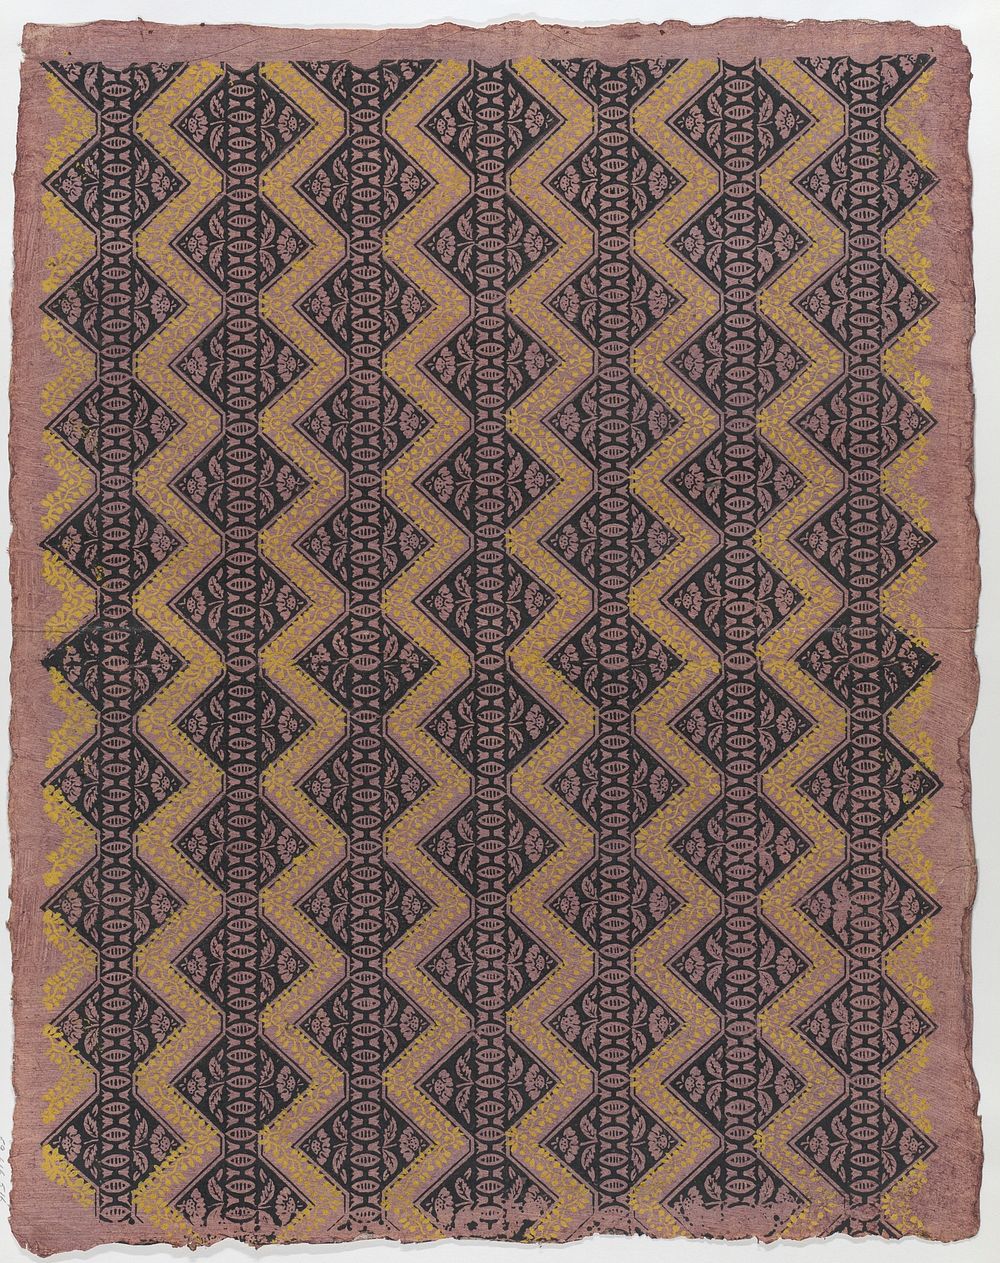 Sheet with overall floral zig zagging pattern by Anonymous